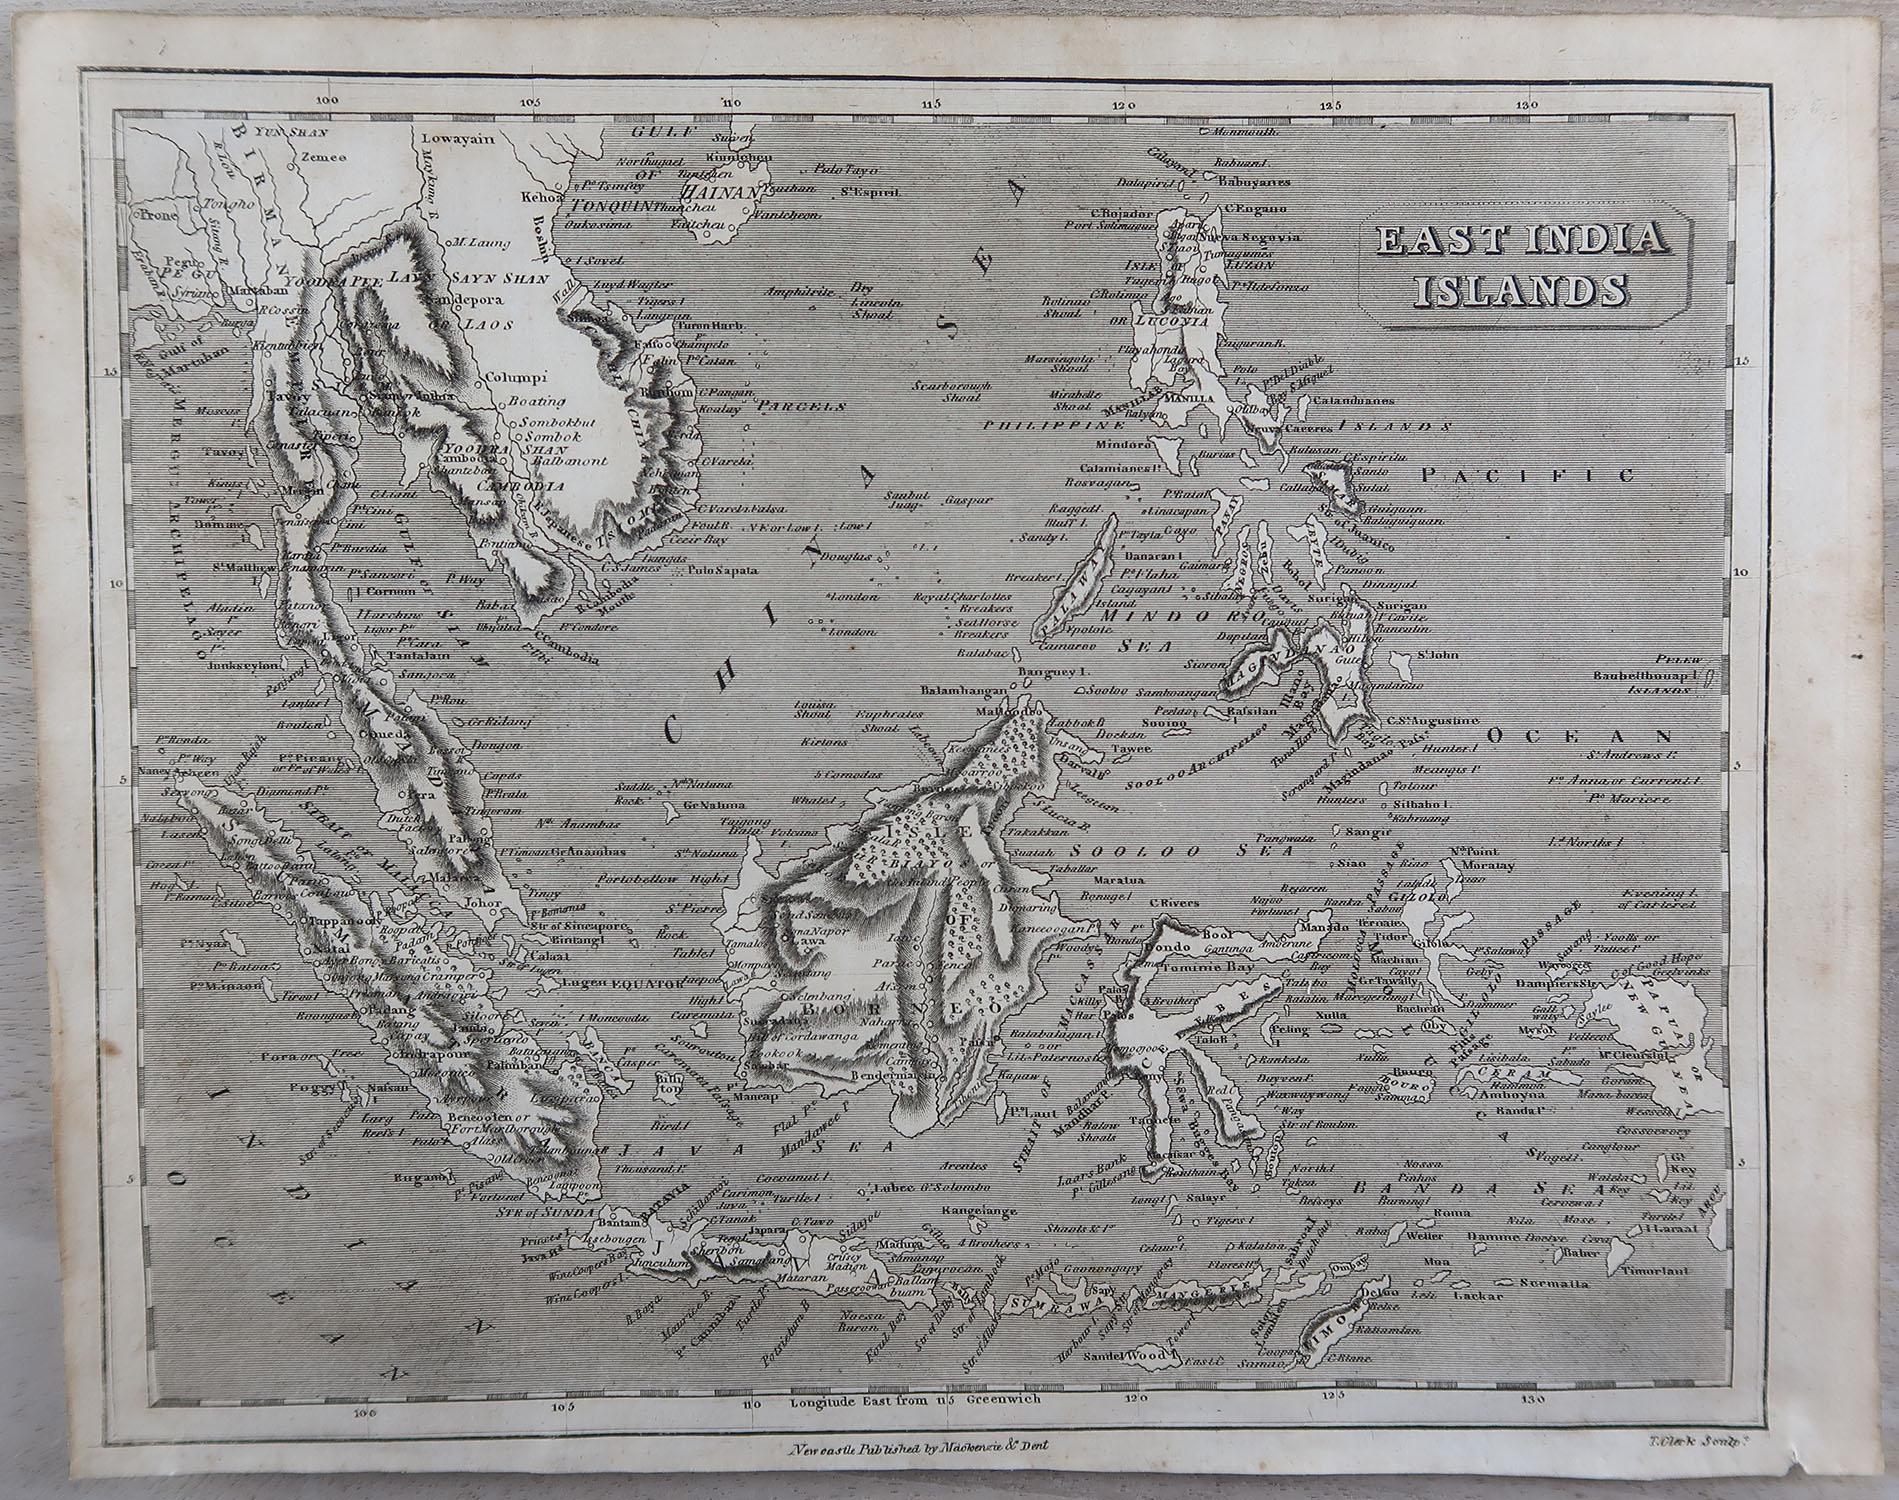 Great map of South East Asia

Copper-plate engraving

Drawn and engraved by Thomas Clerk, Edinburgh.

Published by Mackenzie And Dent, 1817

Unframed.